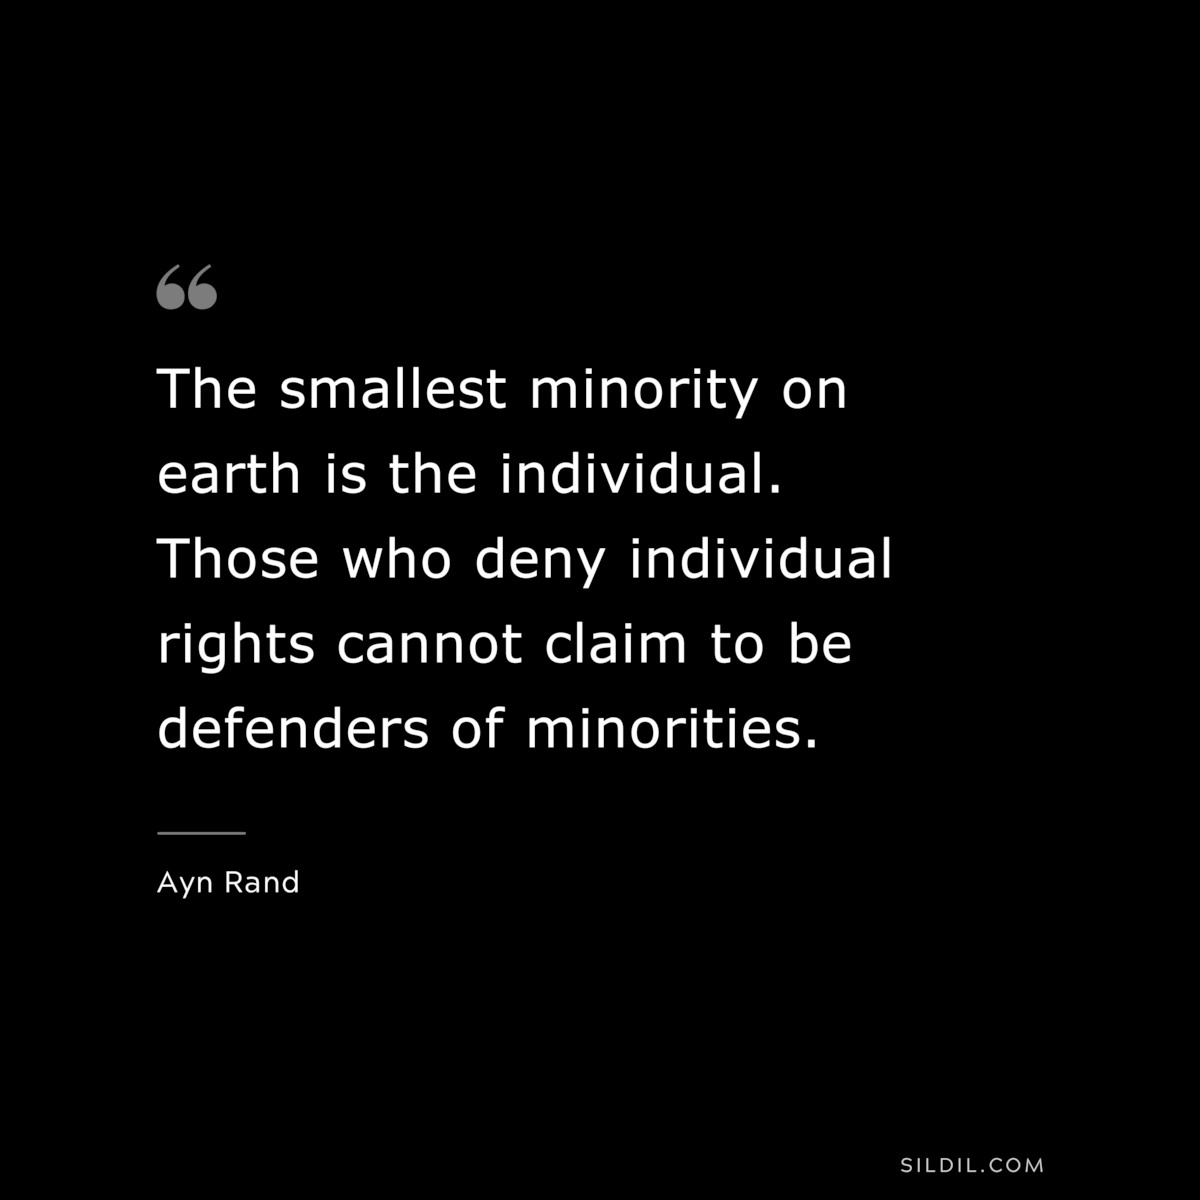 The smallest minority on earth is the individual. Those who deny individual rights cannot claim to be defenders of minorities. ― Ayn Rand